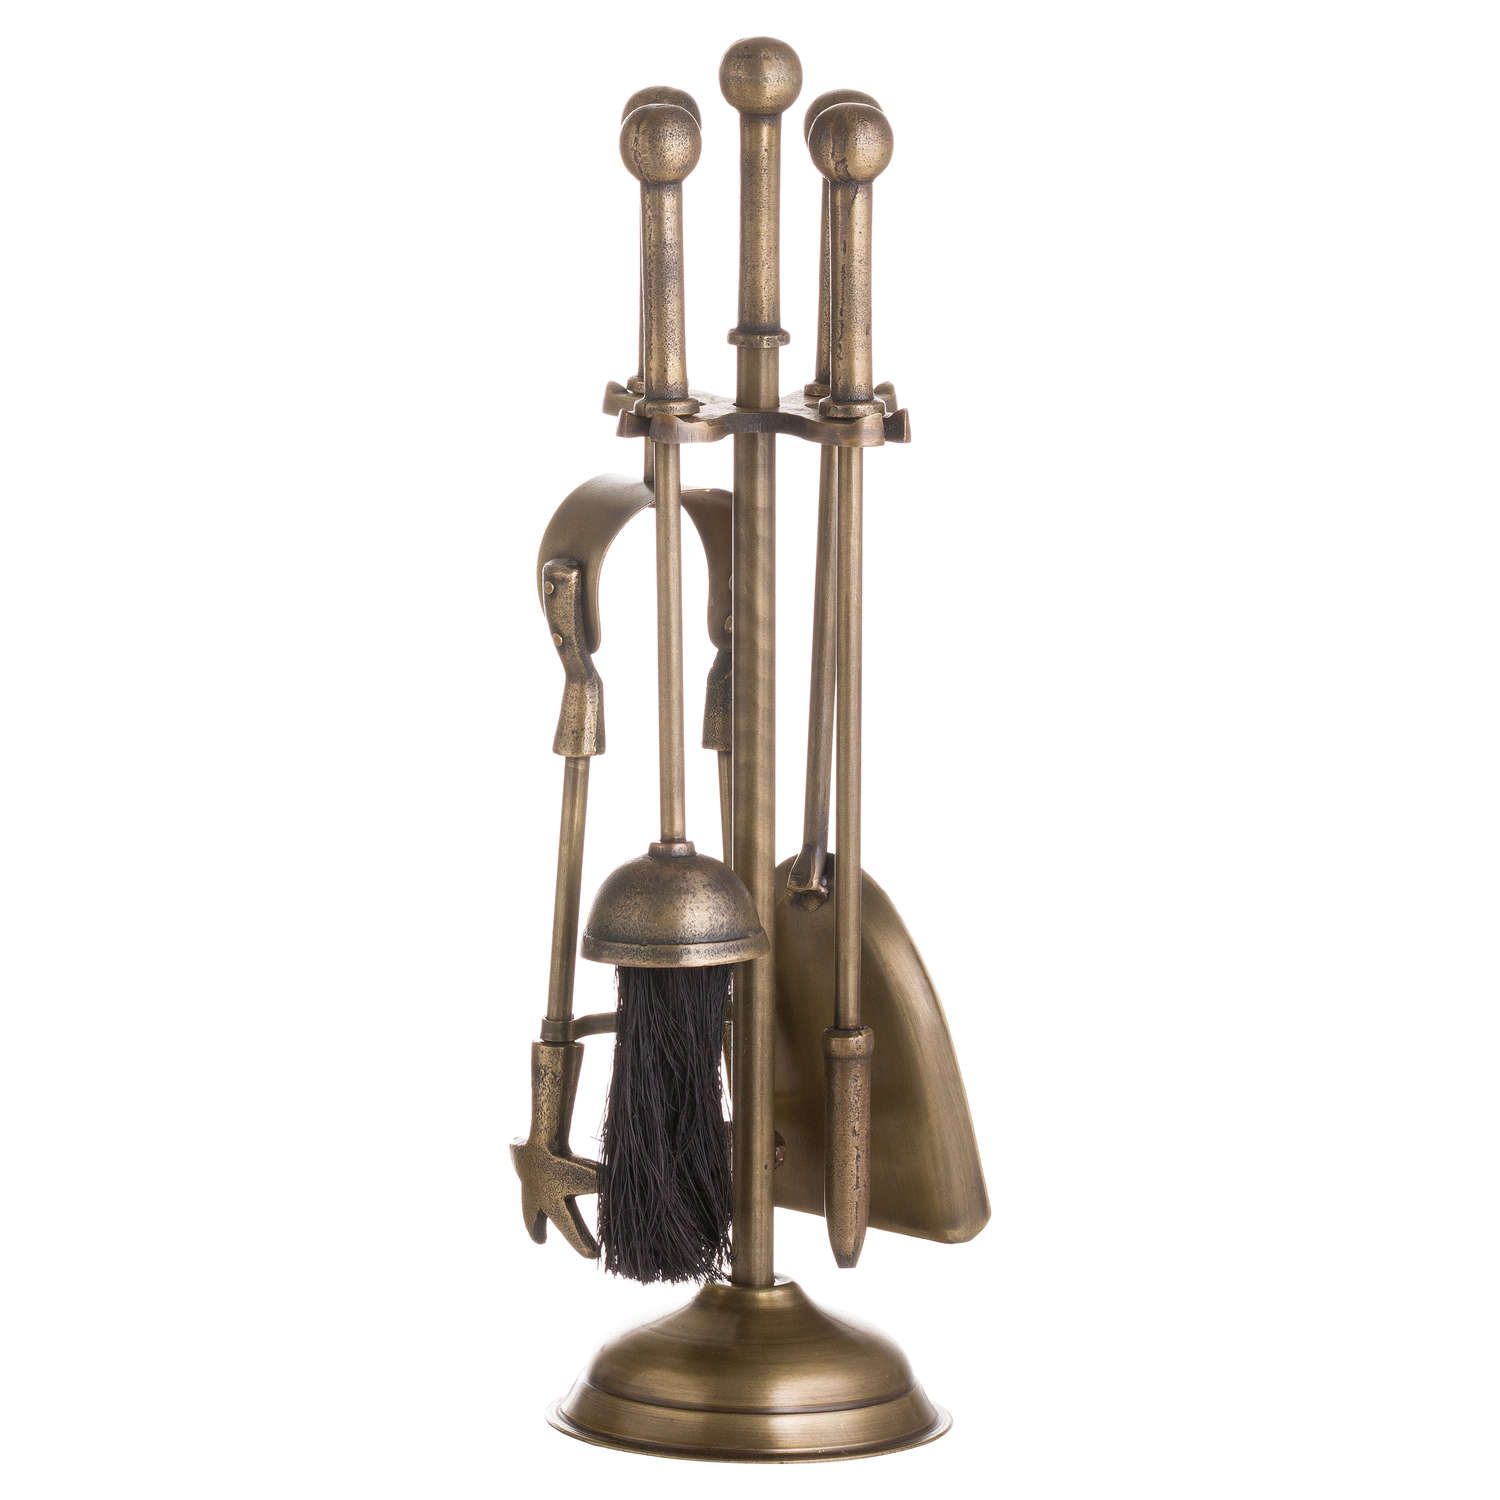 Ball Topped Companion Set In Antique Brass - Image 1